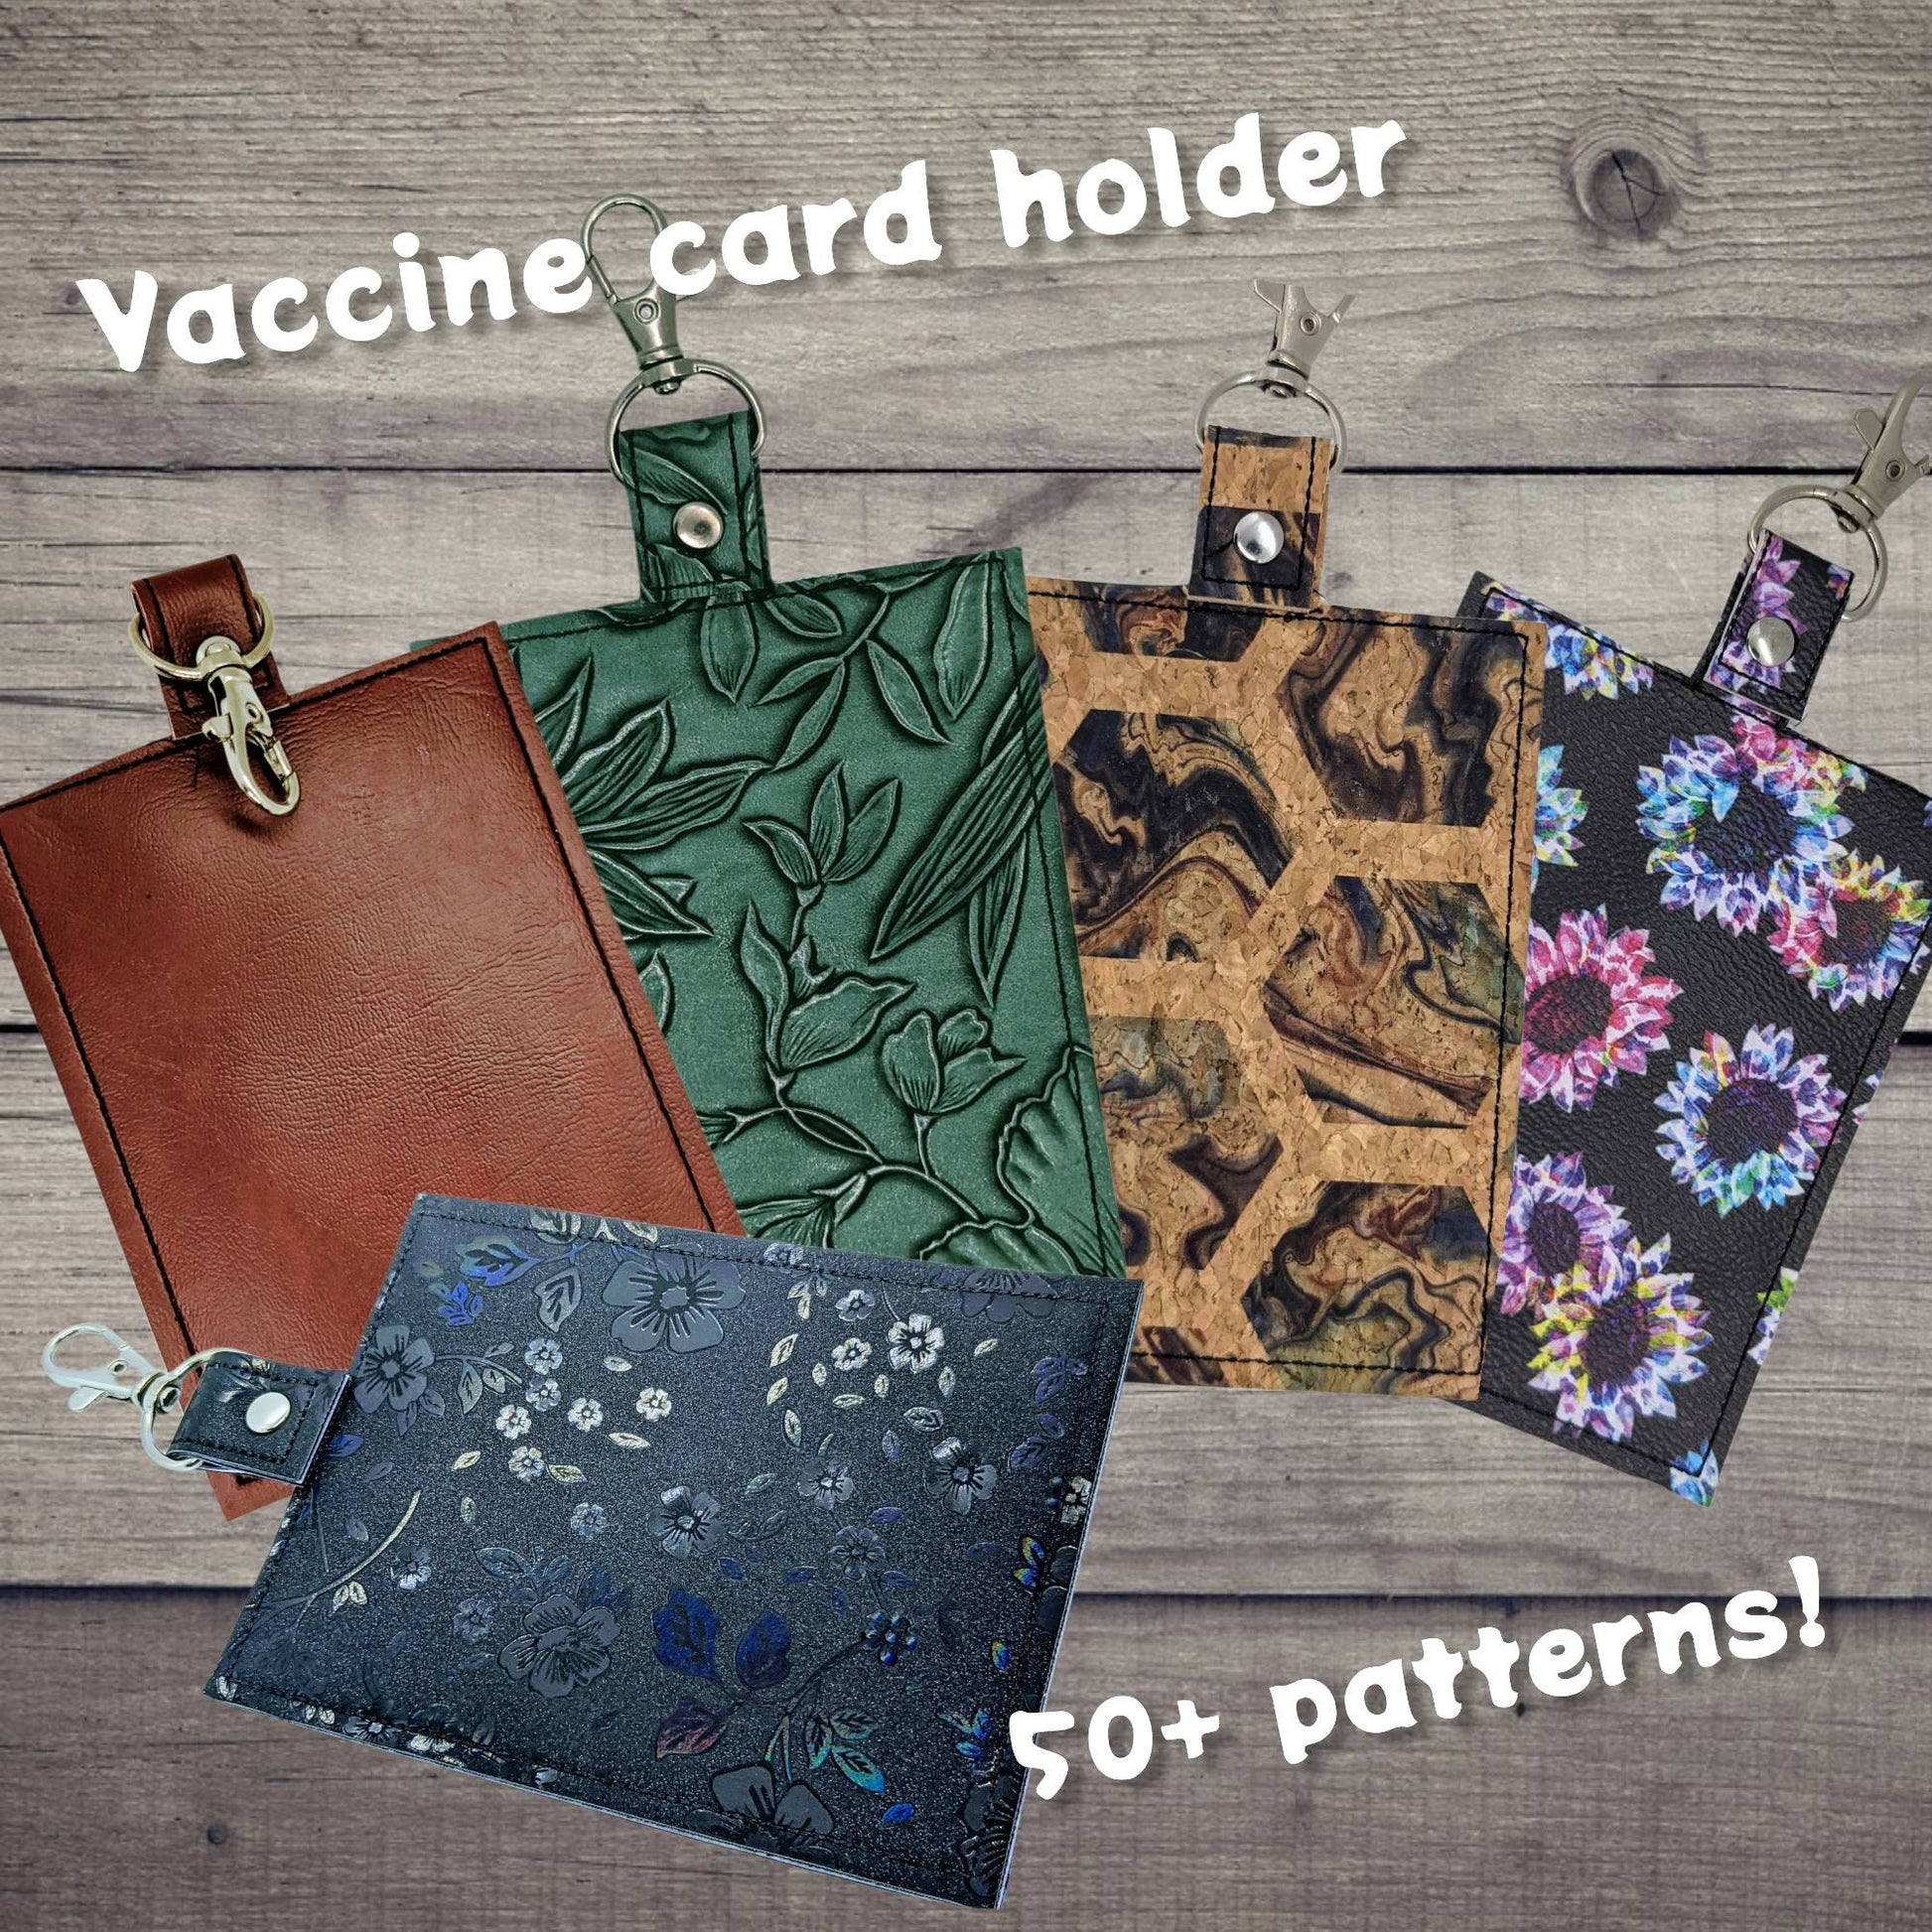 Sleek vaccination card/ID  protector. Space for ID, cash, valuables. Attach to purse, bag, backback or beltloops Vinyl, cork, leather.